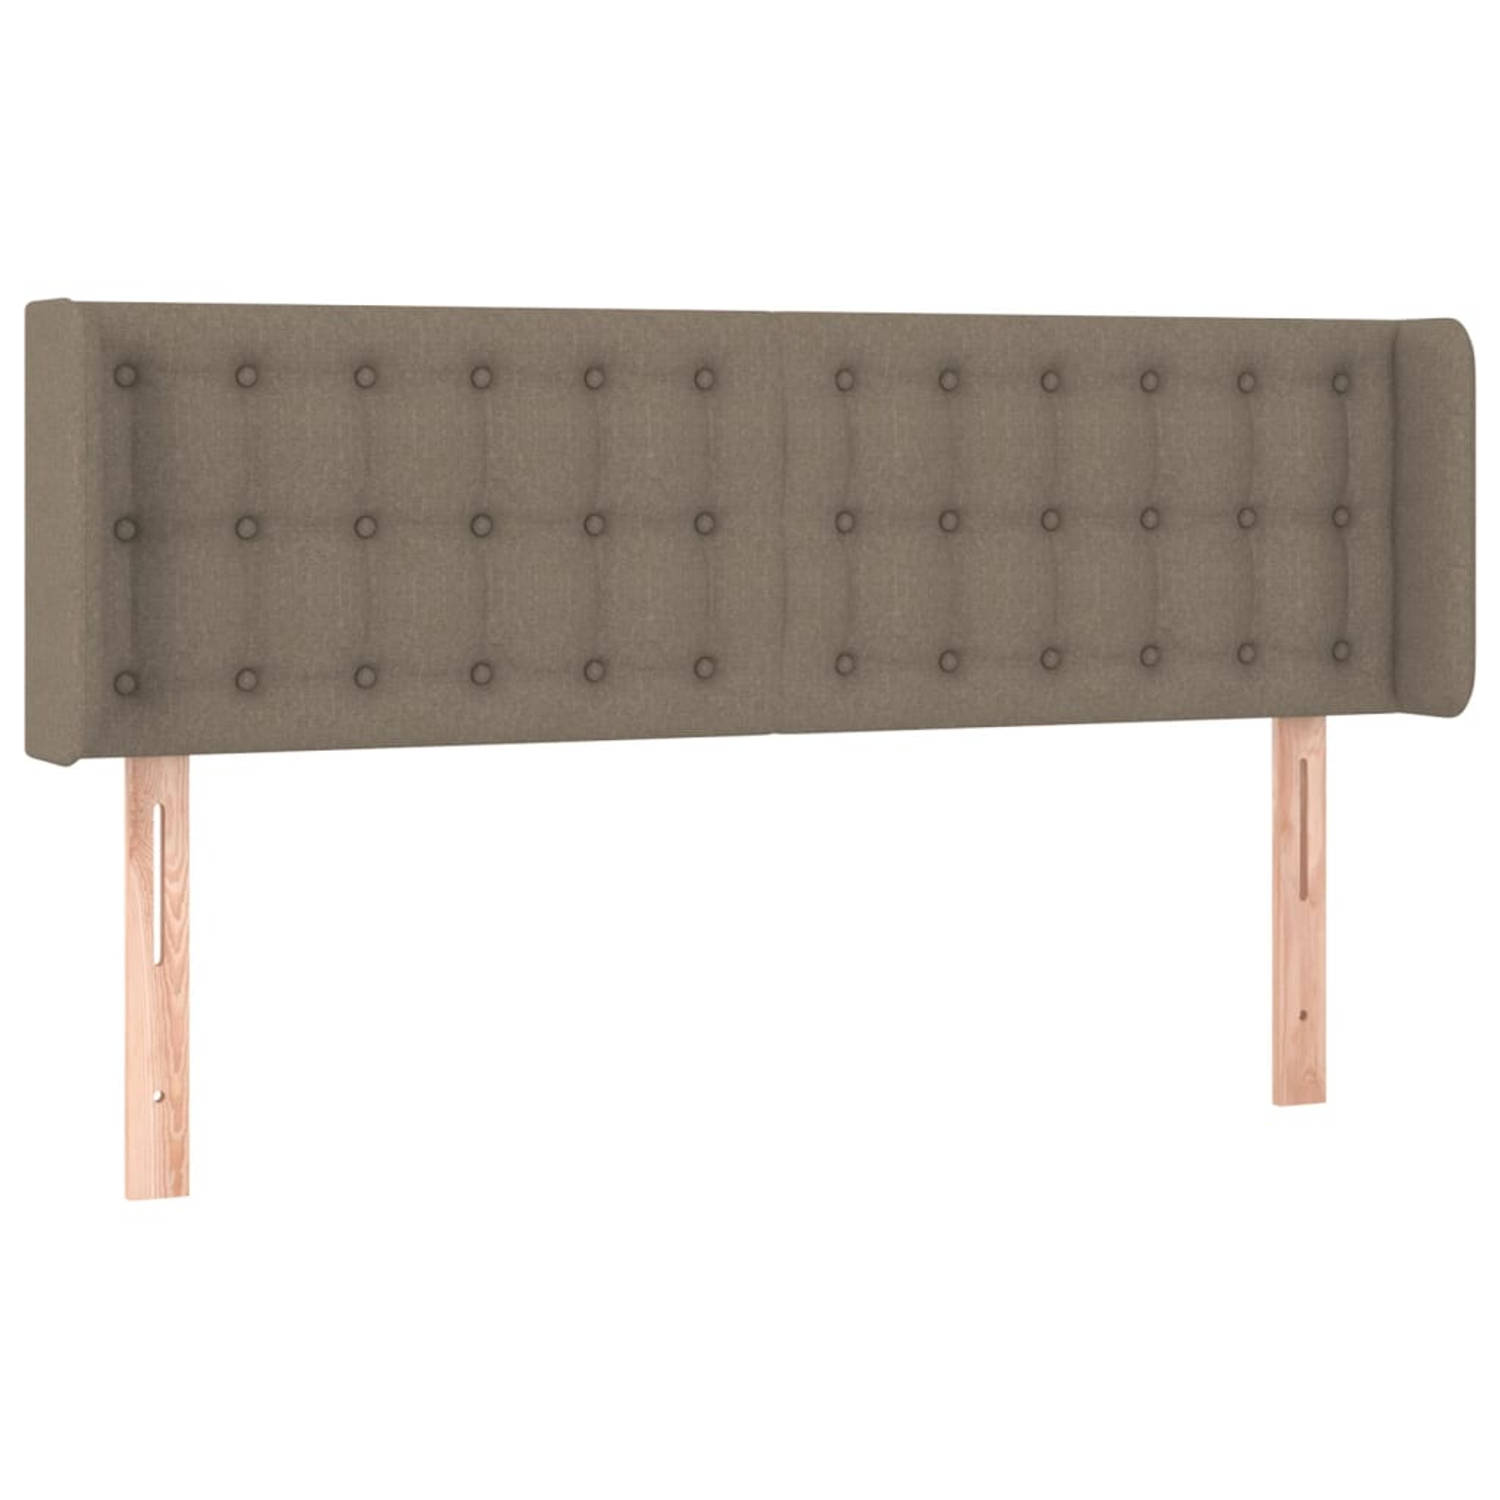 The Living Store Hoofdeind Bedombouw - 147 x 16 x 78/88 cm - Taupe